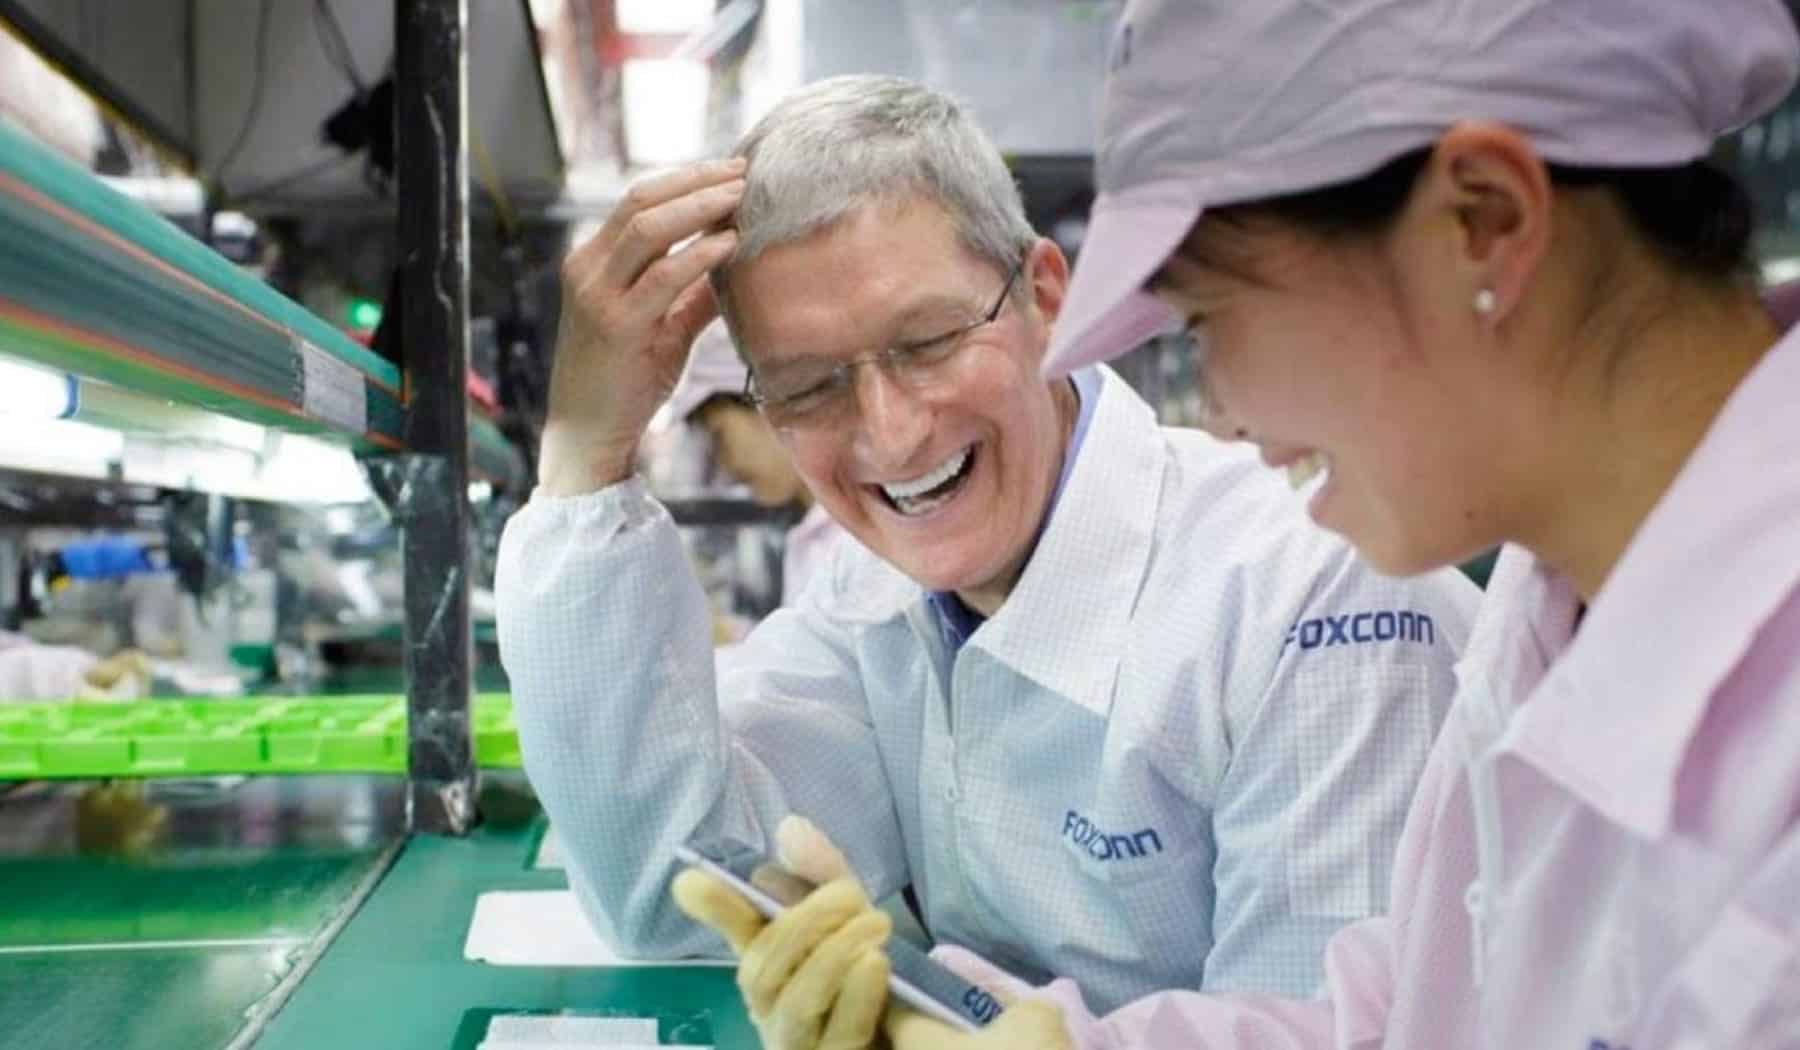 US lawmaker questions Apple CEO in regards to forced Uyghur labour report